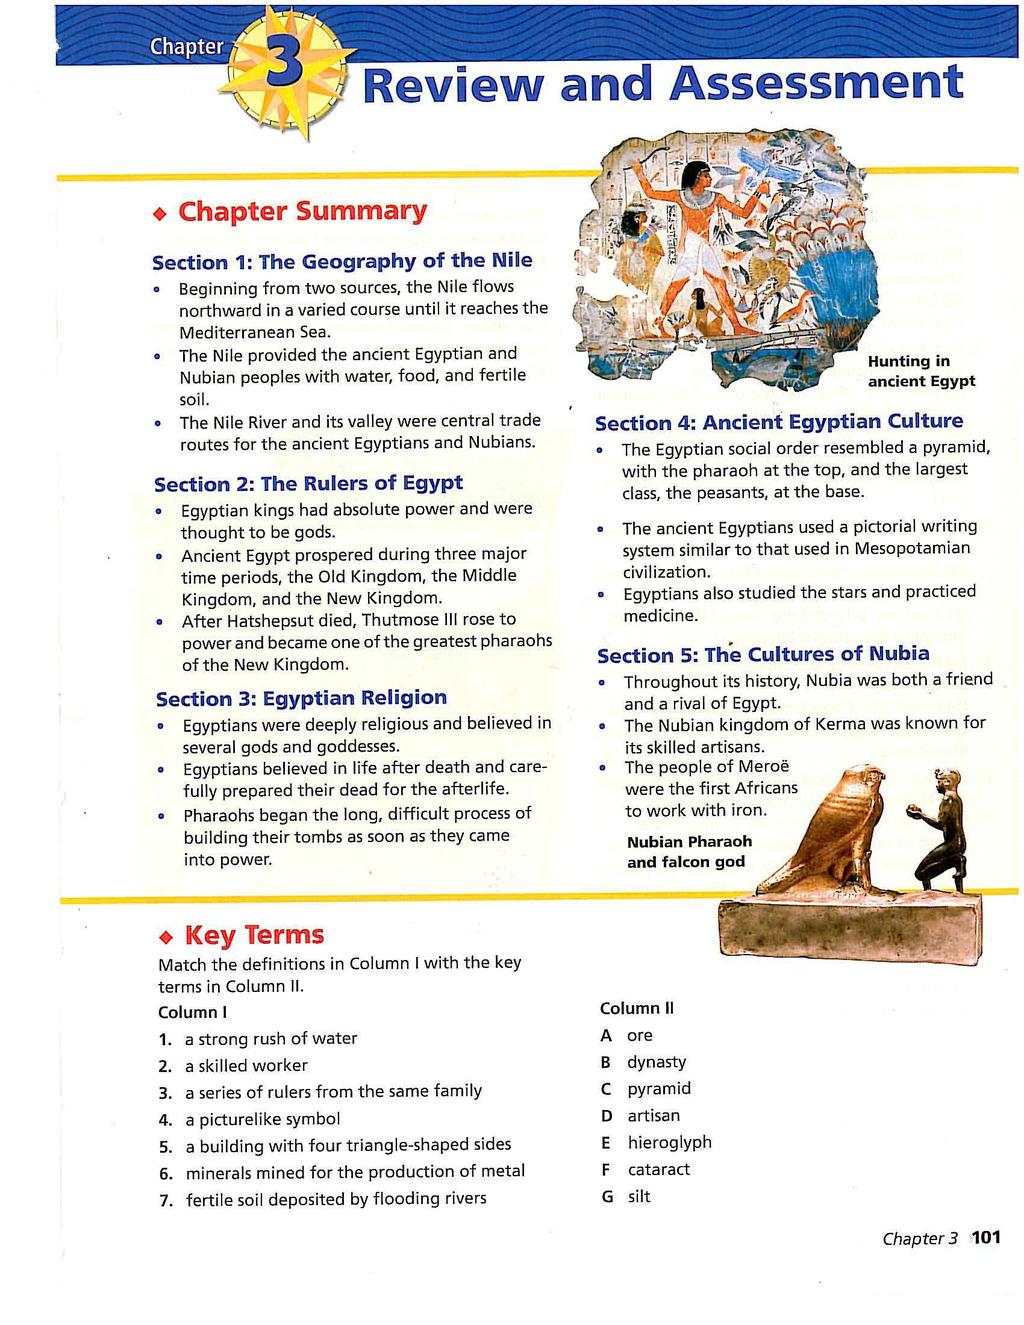 Review and Assessment Chapter Summary Section 1: The Geography of the Nile Beginning from two sources, the Nile flows northward in a varied course until it reaches the Mediterranean Sea.